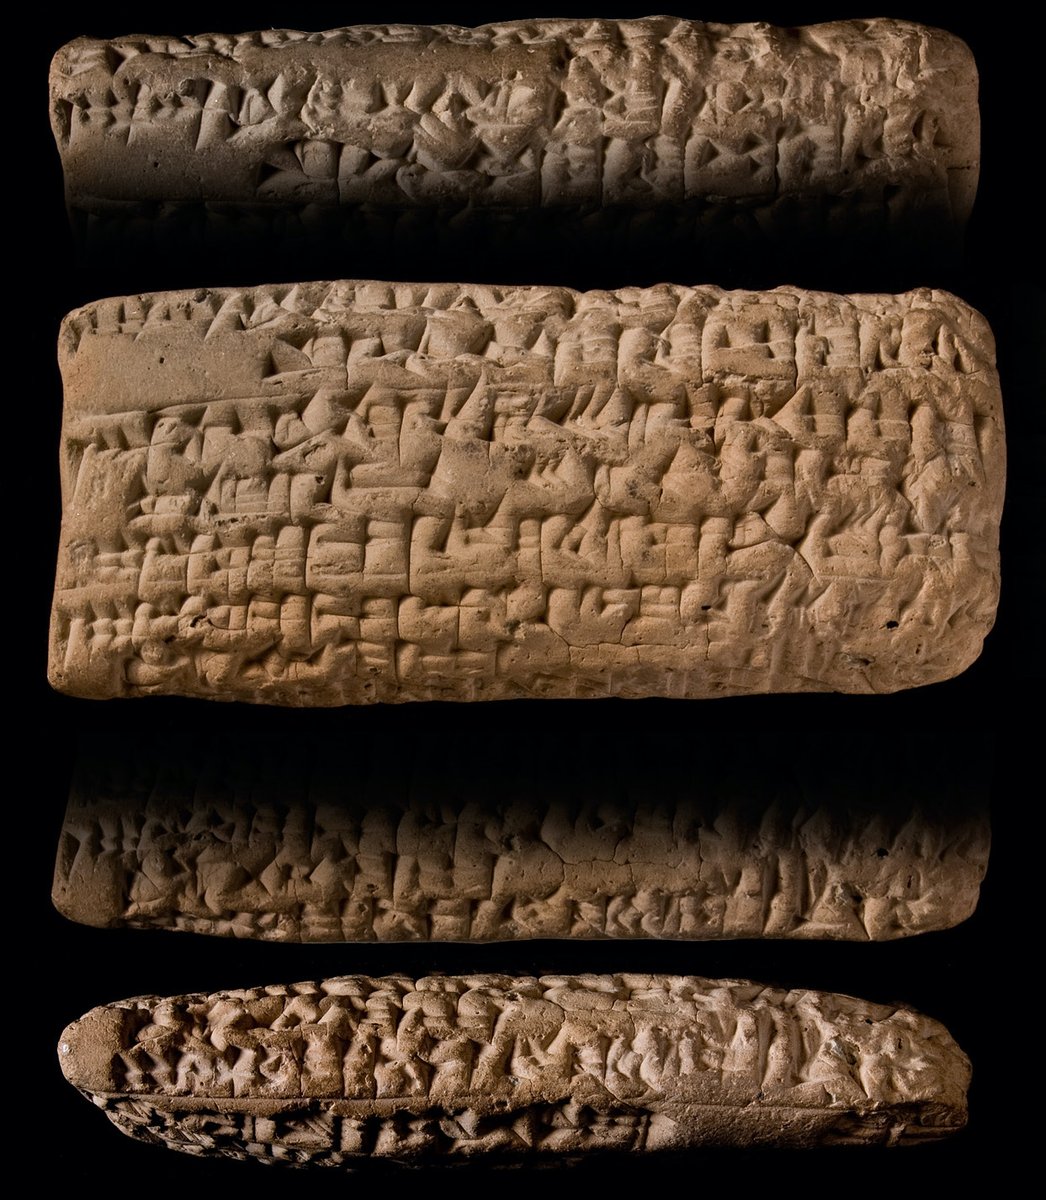 The scholar Bel-le'i writes to the ancient Assyrian king Ashurbanipal (or Esarhaddon) that "If a comet becomes visible in the path of the stars of Anu: there will be a fall of Elam in battle."The report ends with a plea to help find a runaway servant  http://oracc.iaas.upenn.edu/saao/saa08/P237796/html